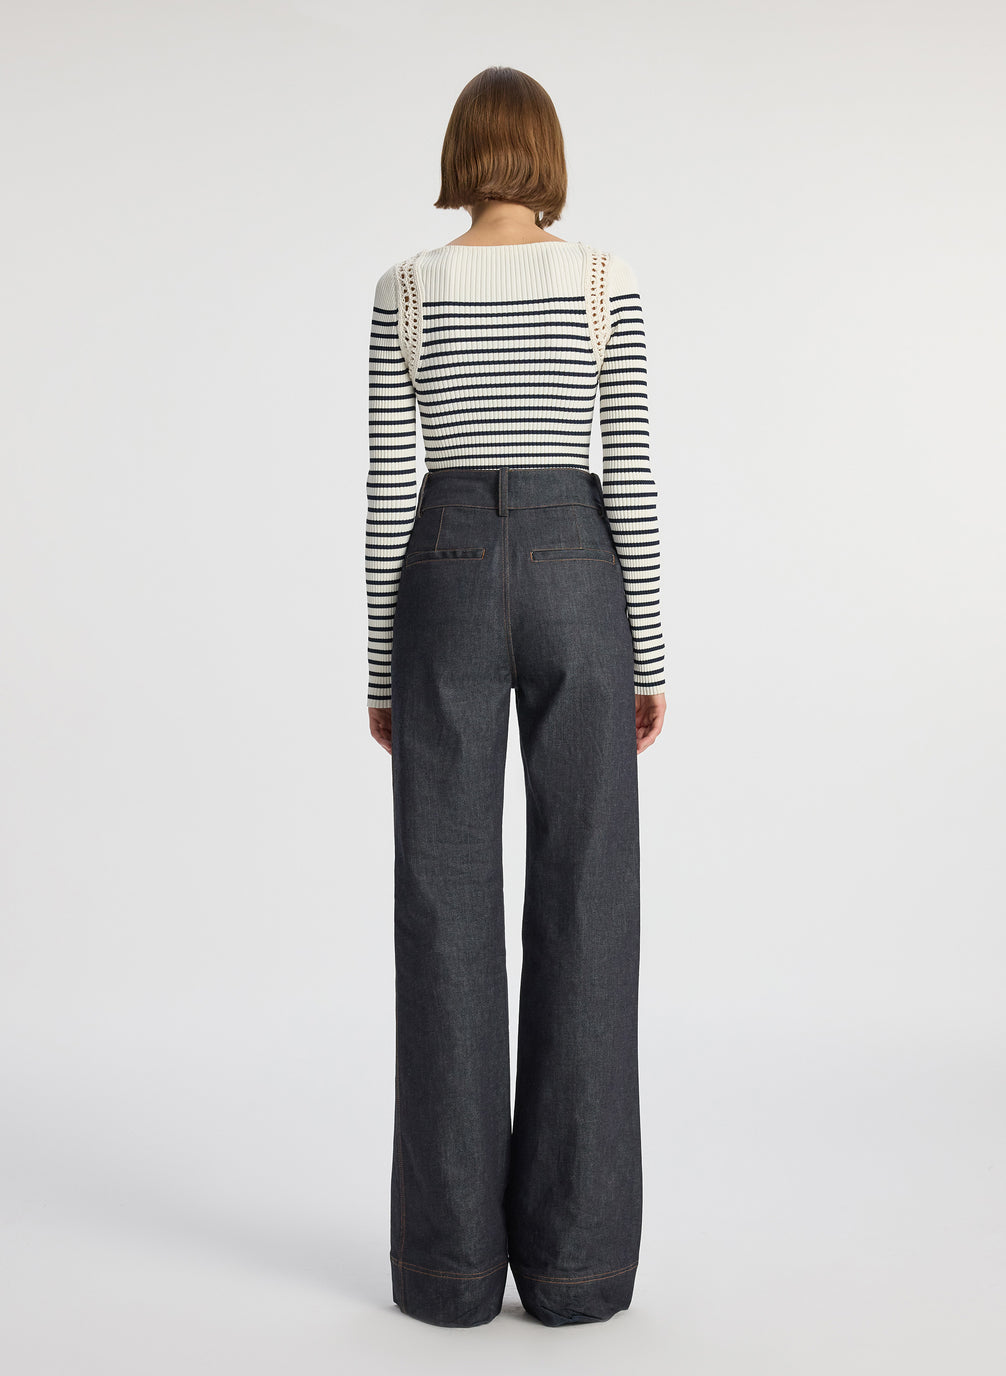 back view of woman wearing white and navy striped top with long bell sleeves and dark wash raw denim jeans